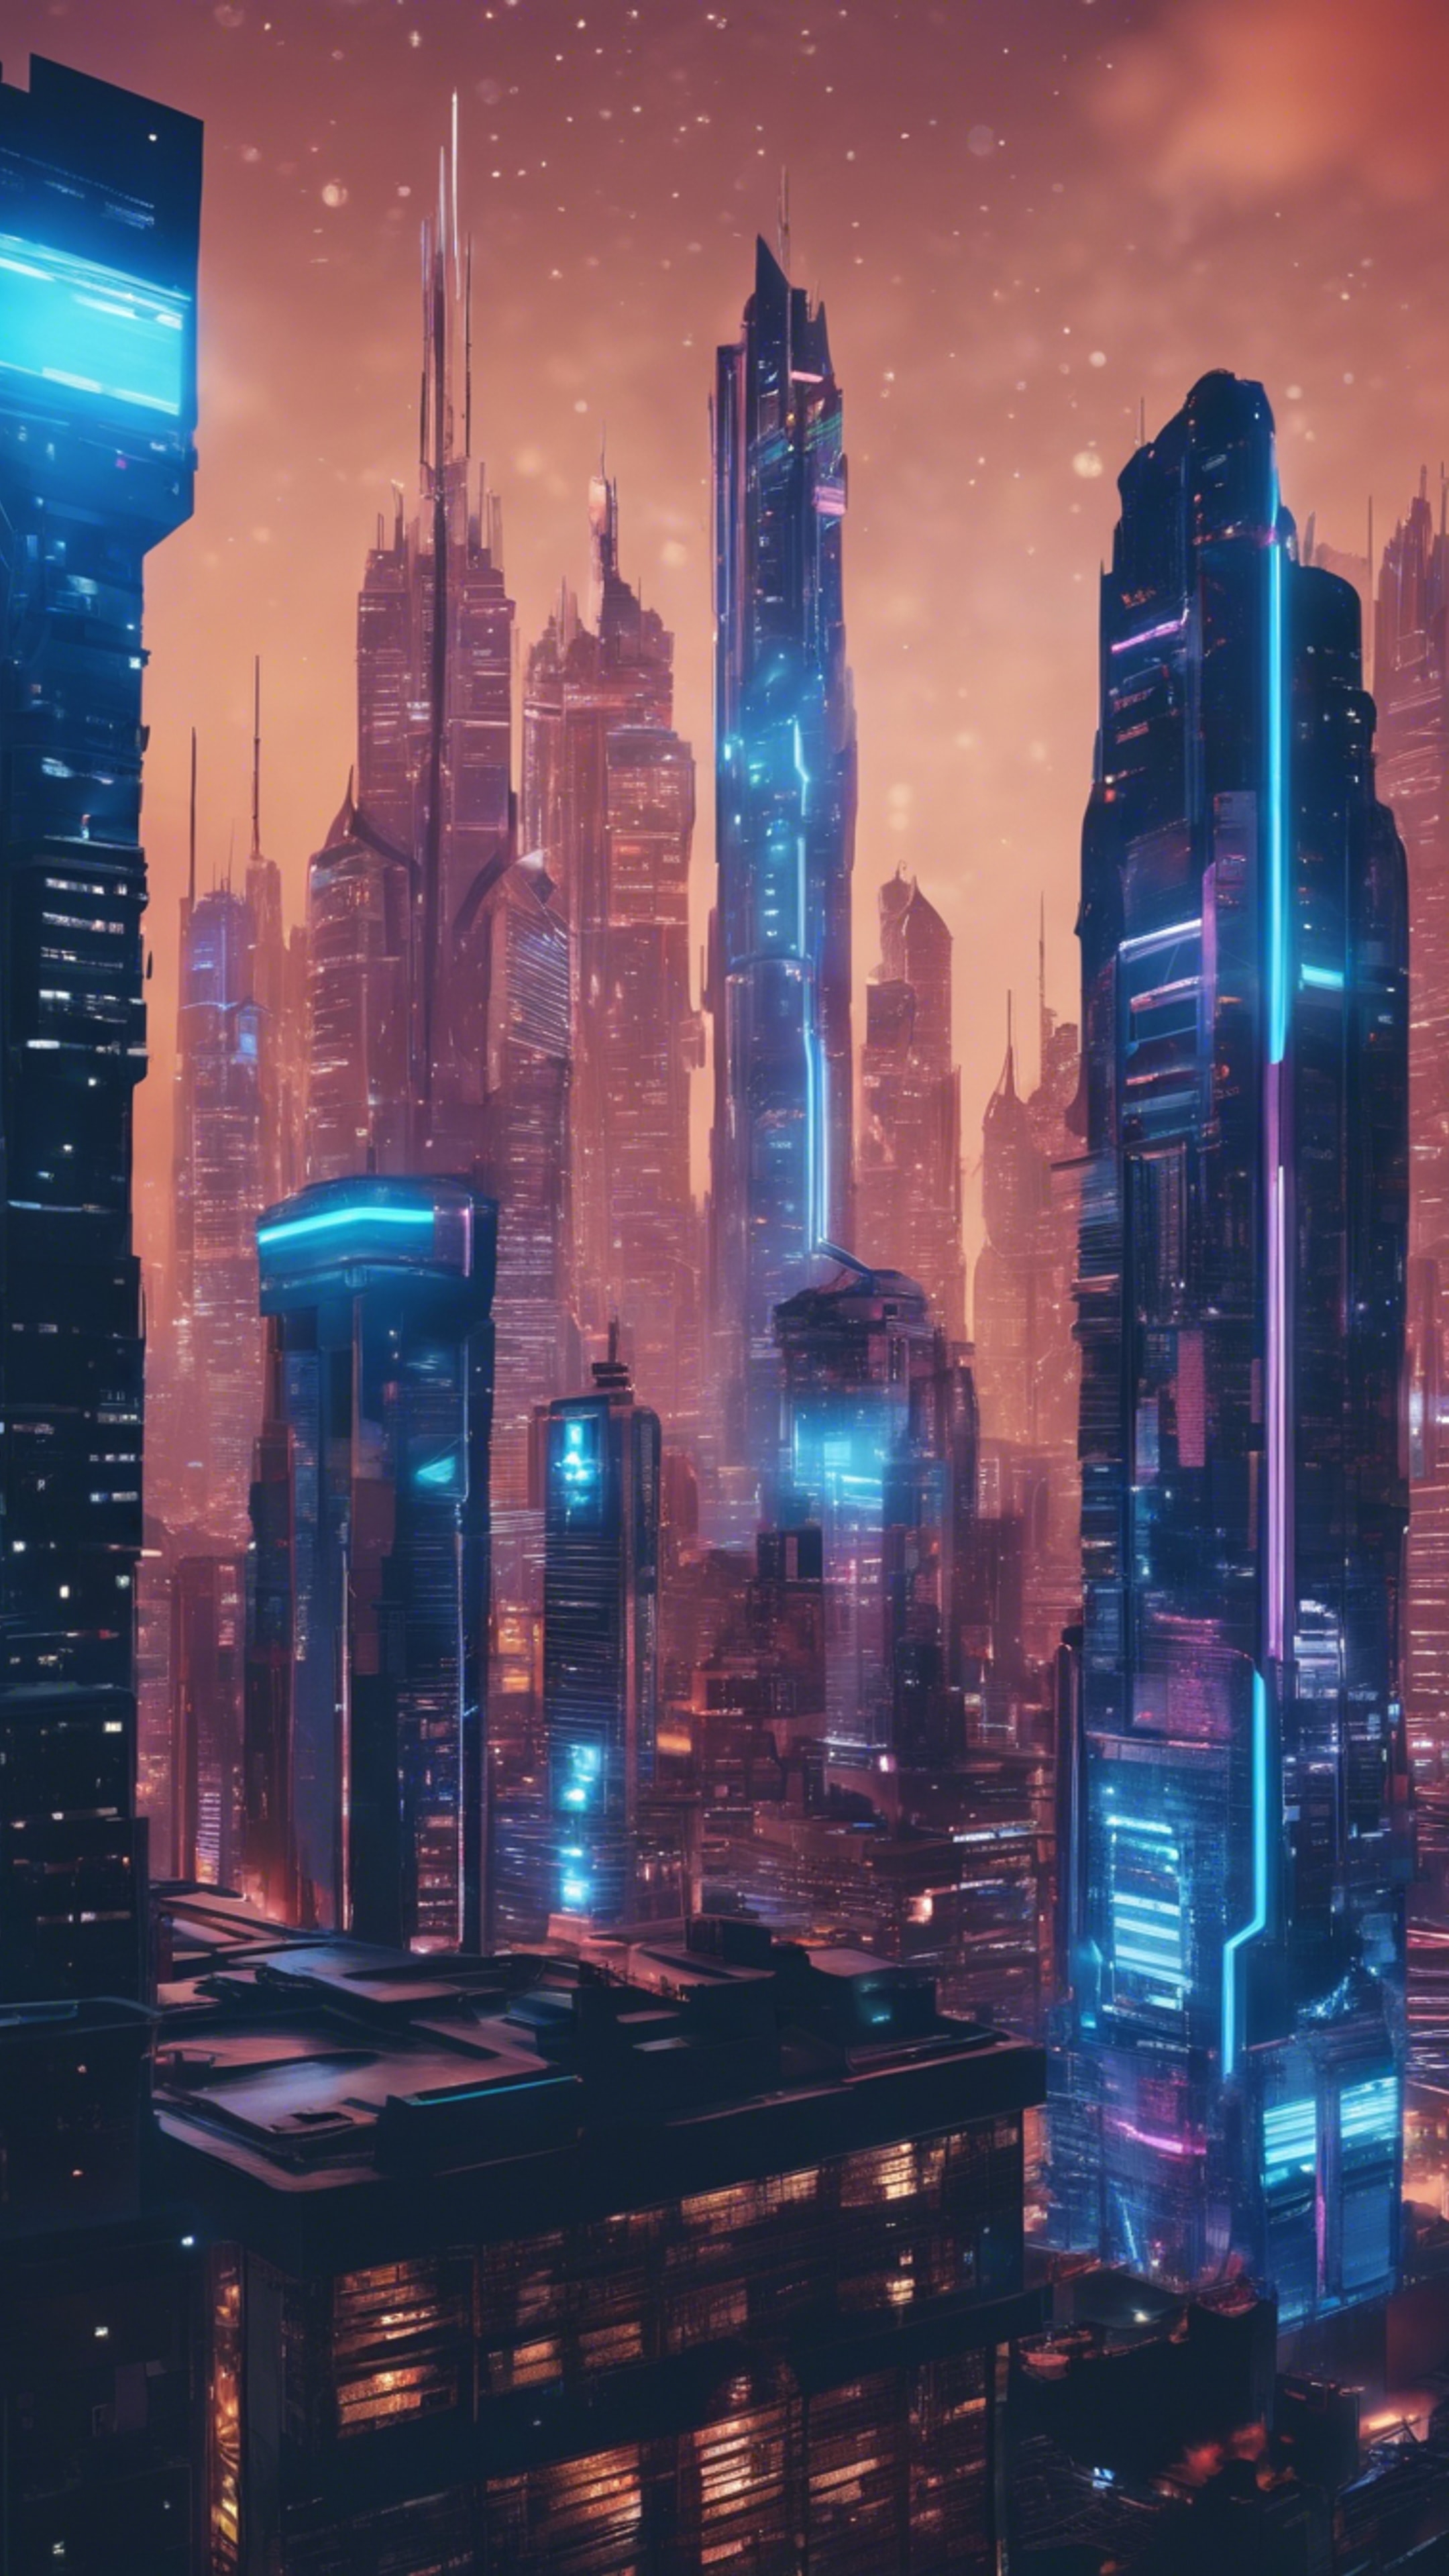 A futuristic city glowing with vibrant neon-blue lights and skyscrapers piercing the night sky. วอลล์เปเปอร์[2f3a3bdee3e14a4e9359]